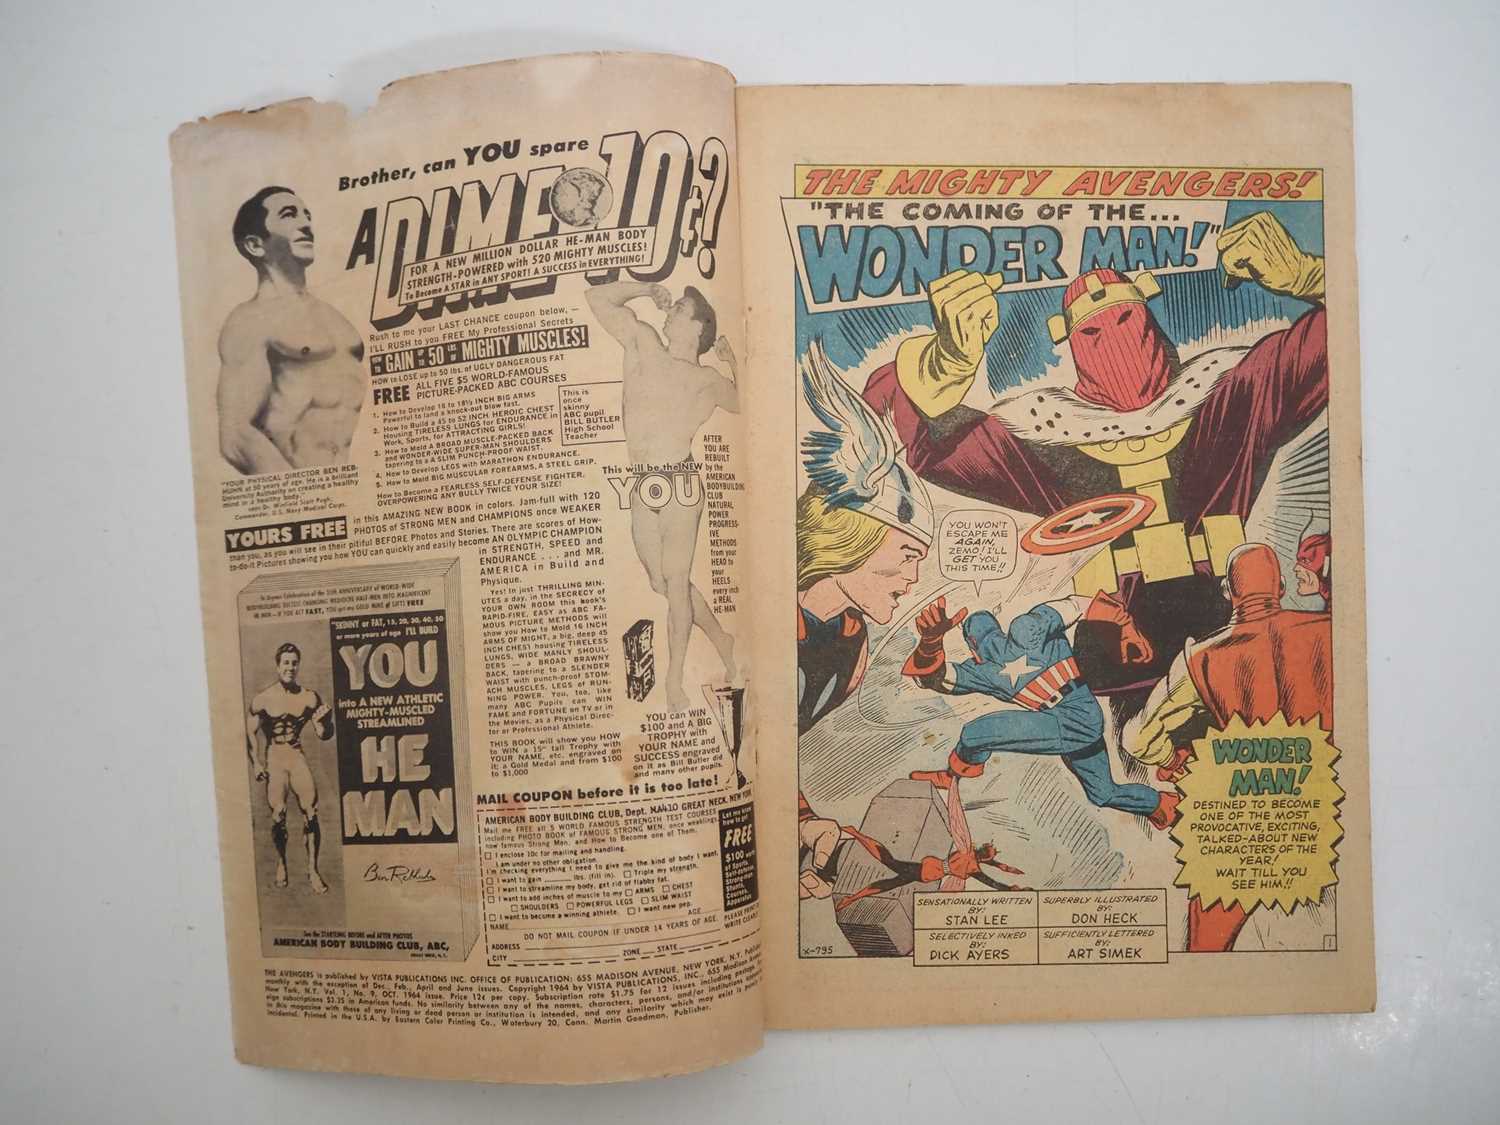 AVENGERS #9 (1964 - MARVEL) - The first appearance and 'death' of Wonder Man - Cover art Jack - Image 9 of 17